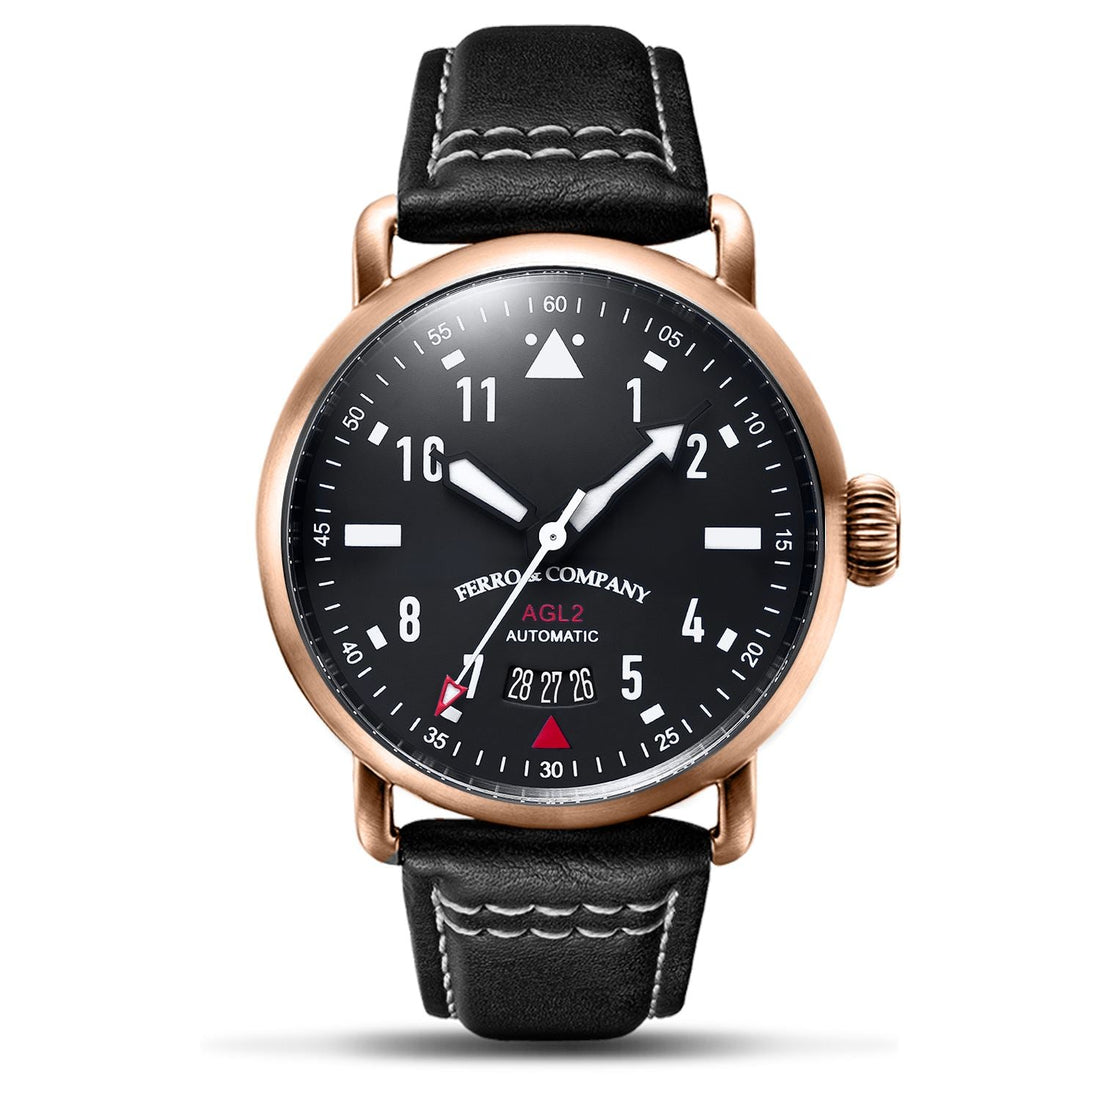 Ferro Watches AGL 2 Vintage style Pilot Watch Black Rose Gold - Ferro & Company Watches